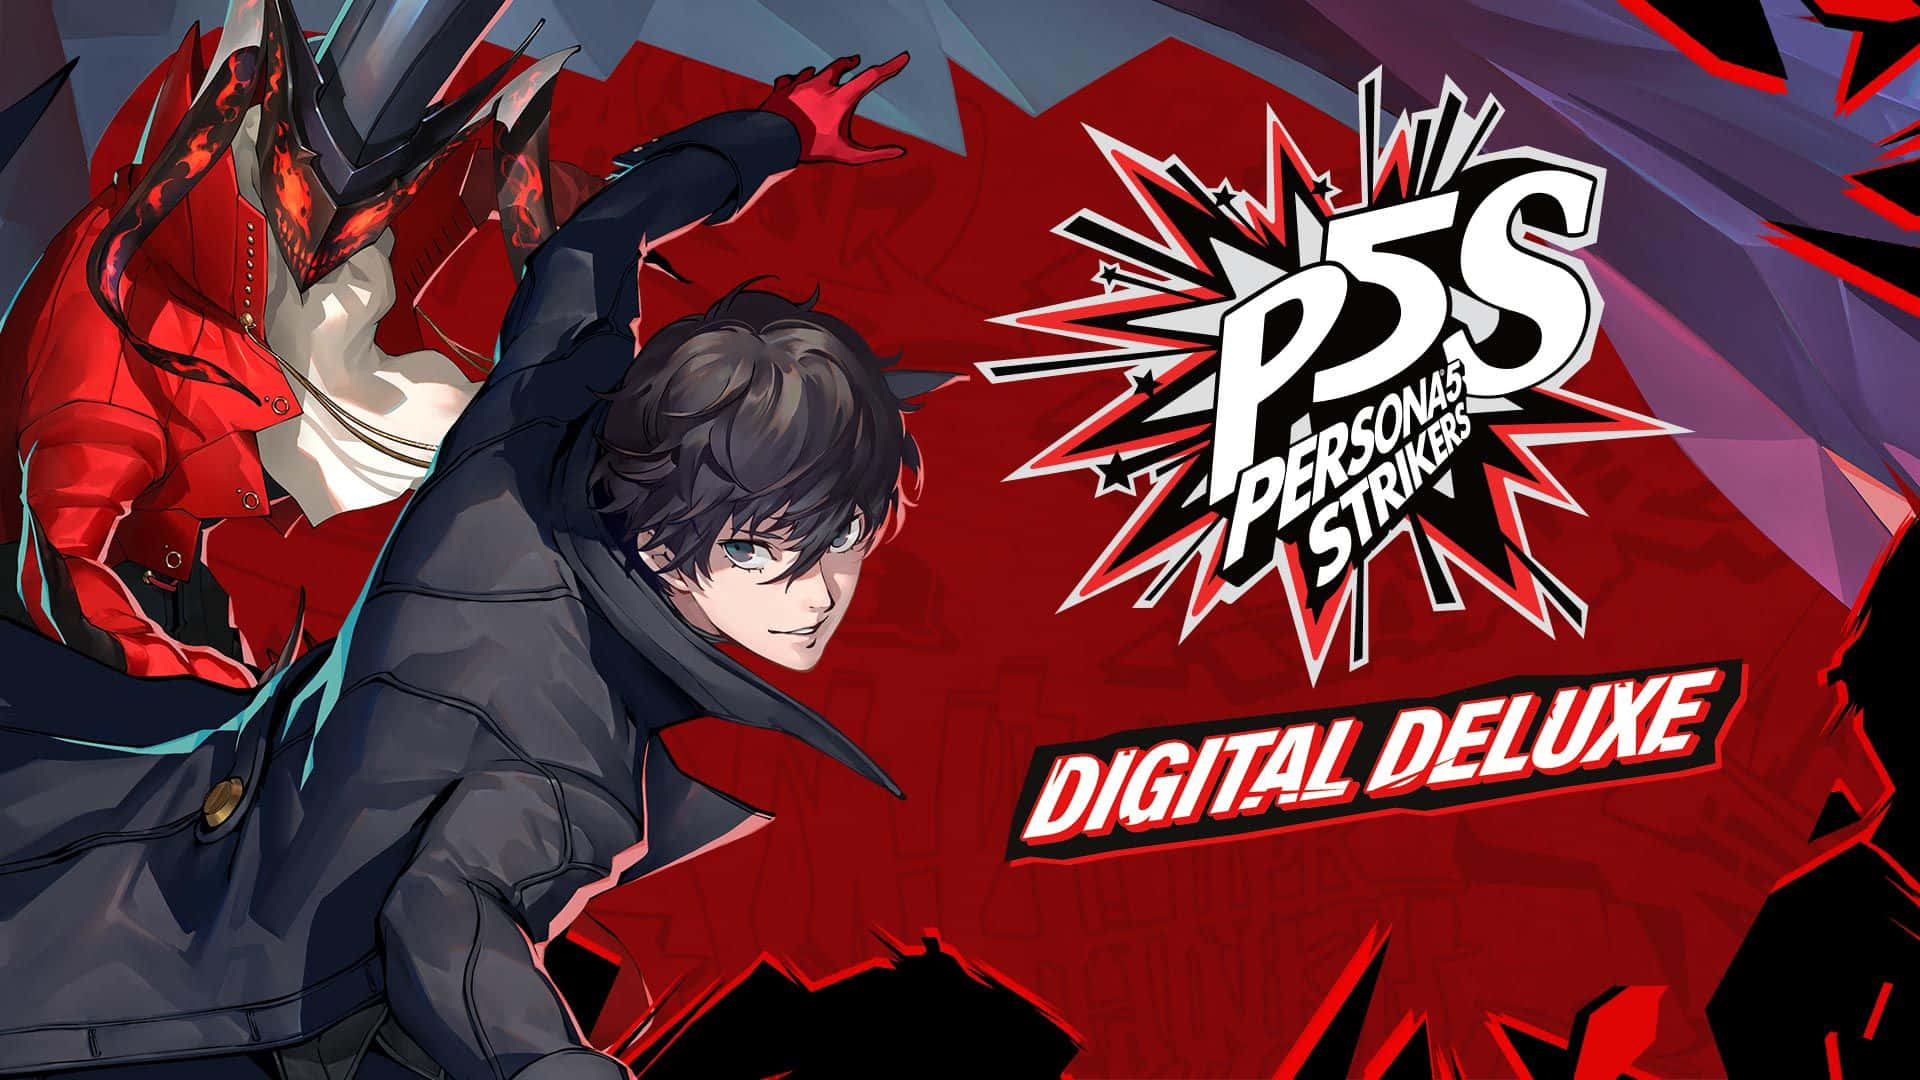 Persona 5 Strikers Unleashes Powerful Attack! Wallpaper